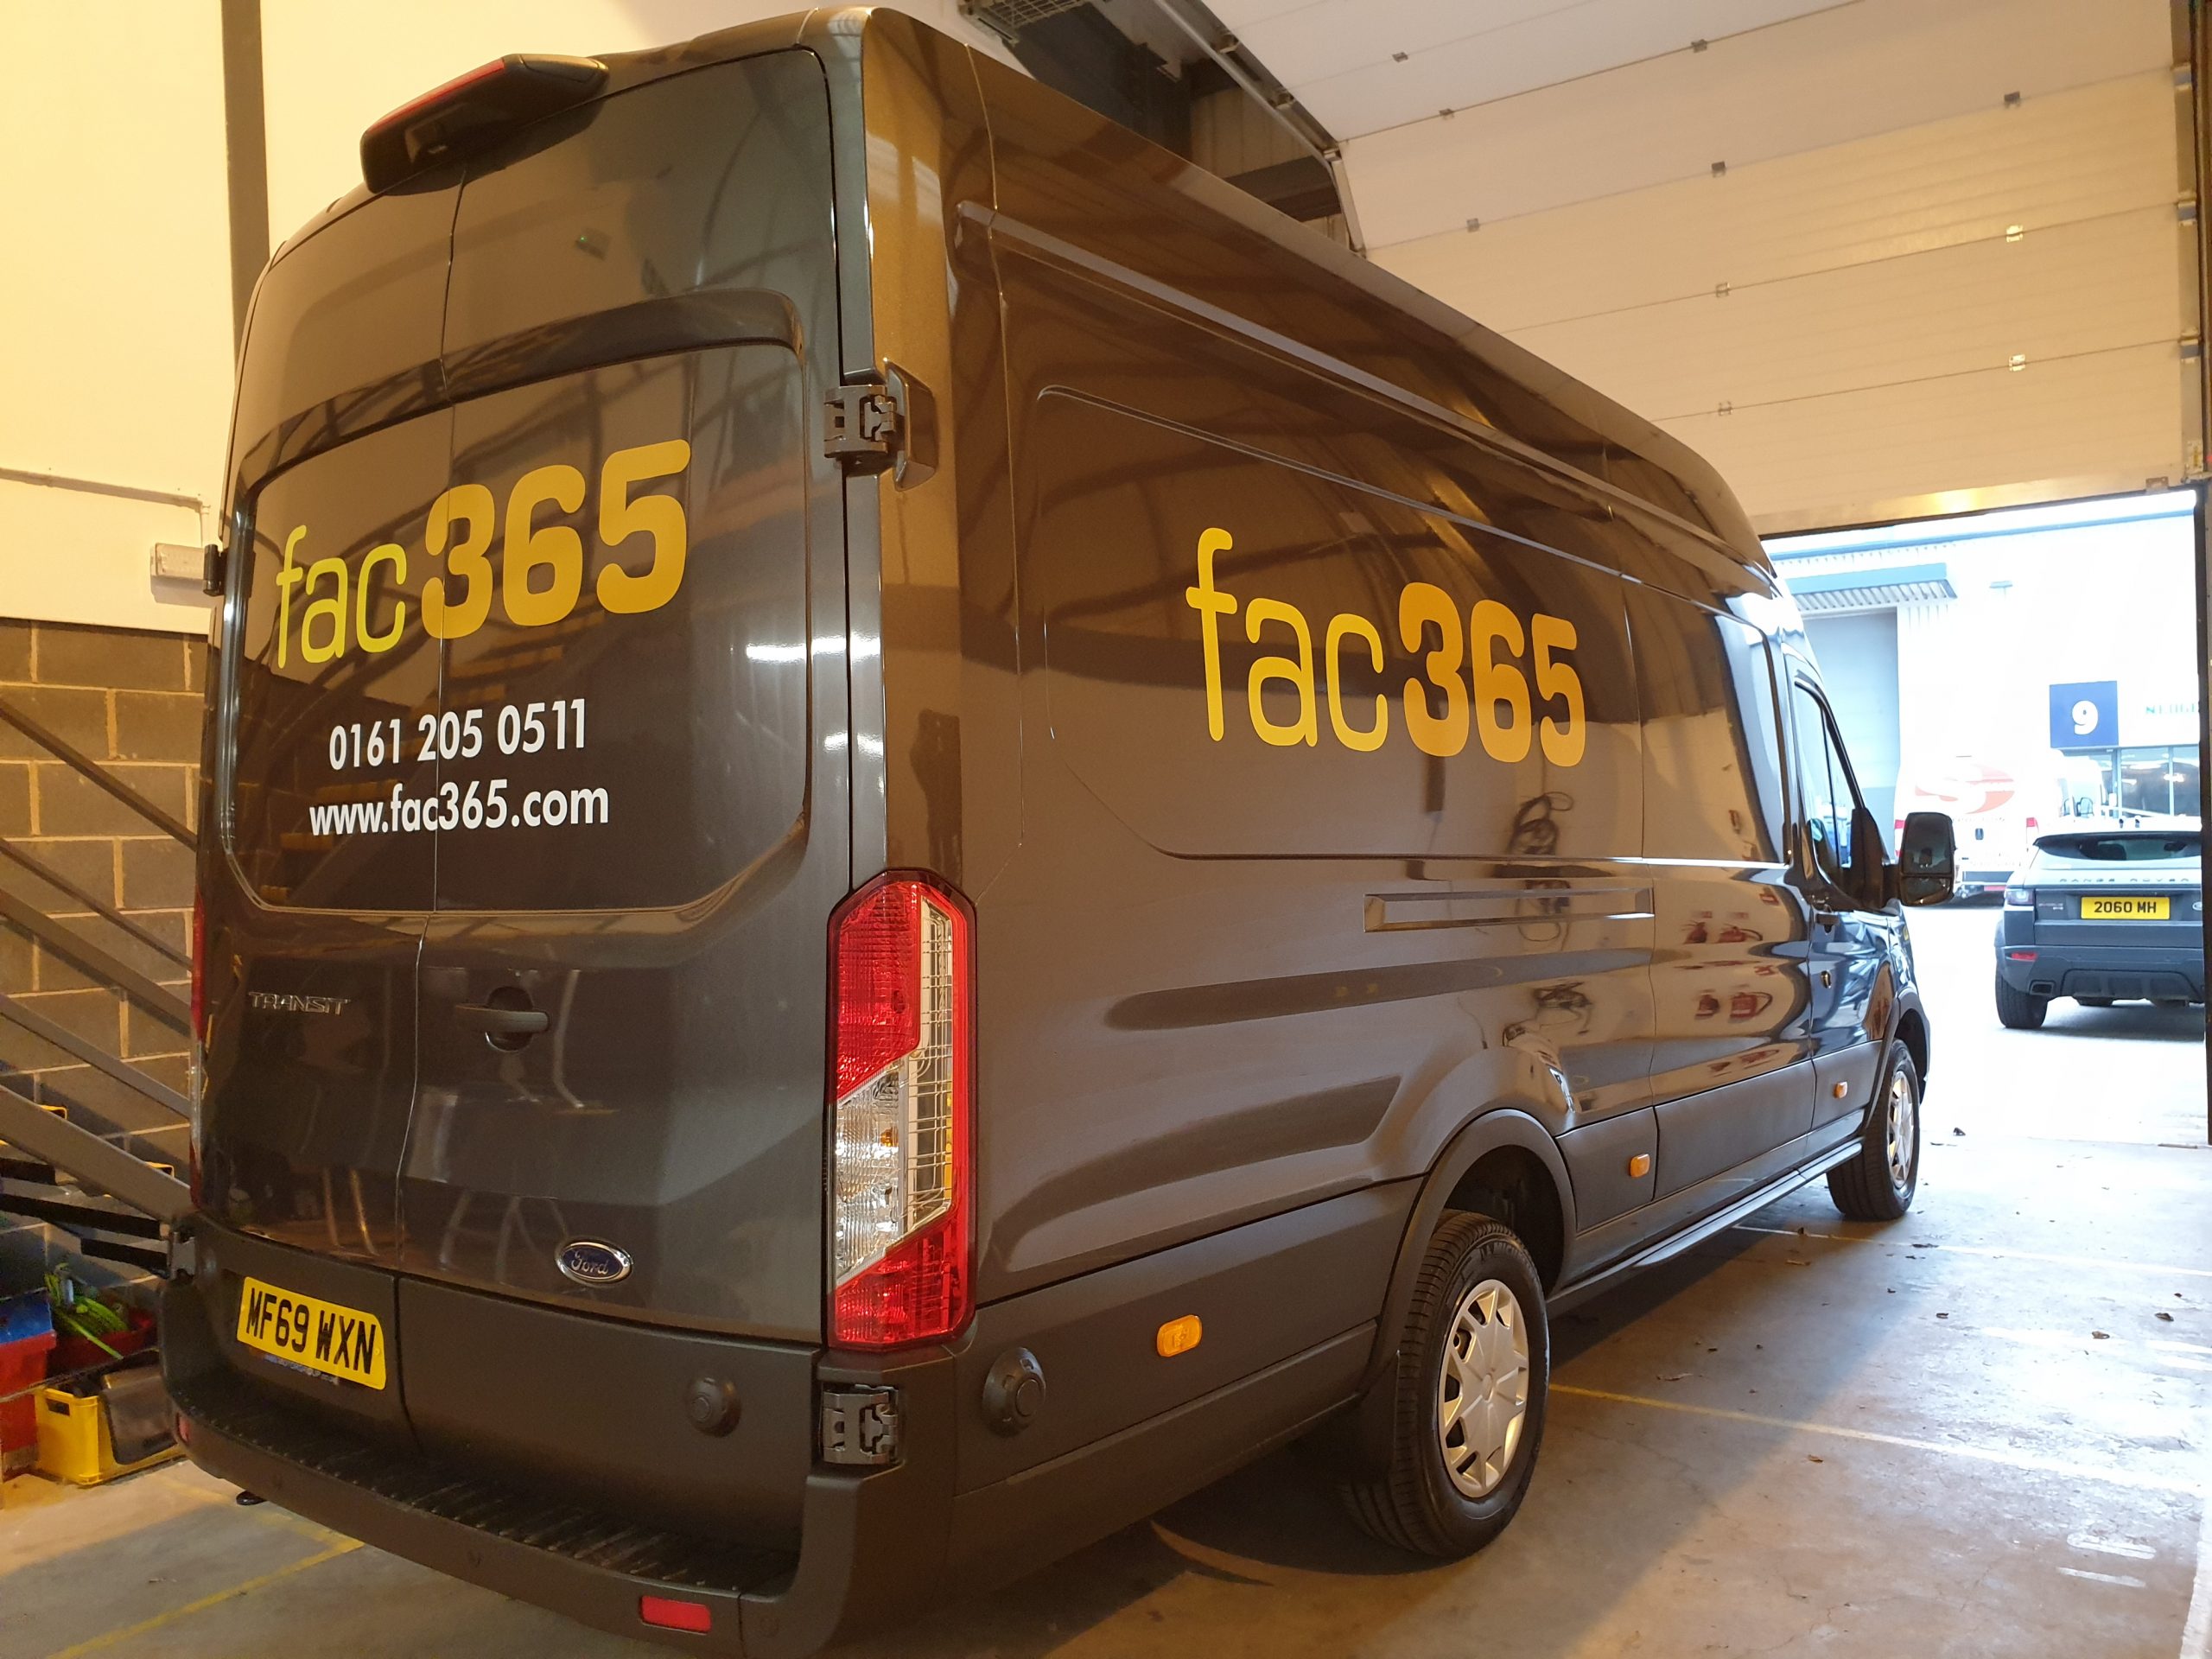 Please welcome our new addition to fac365